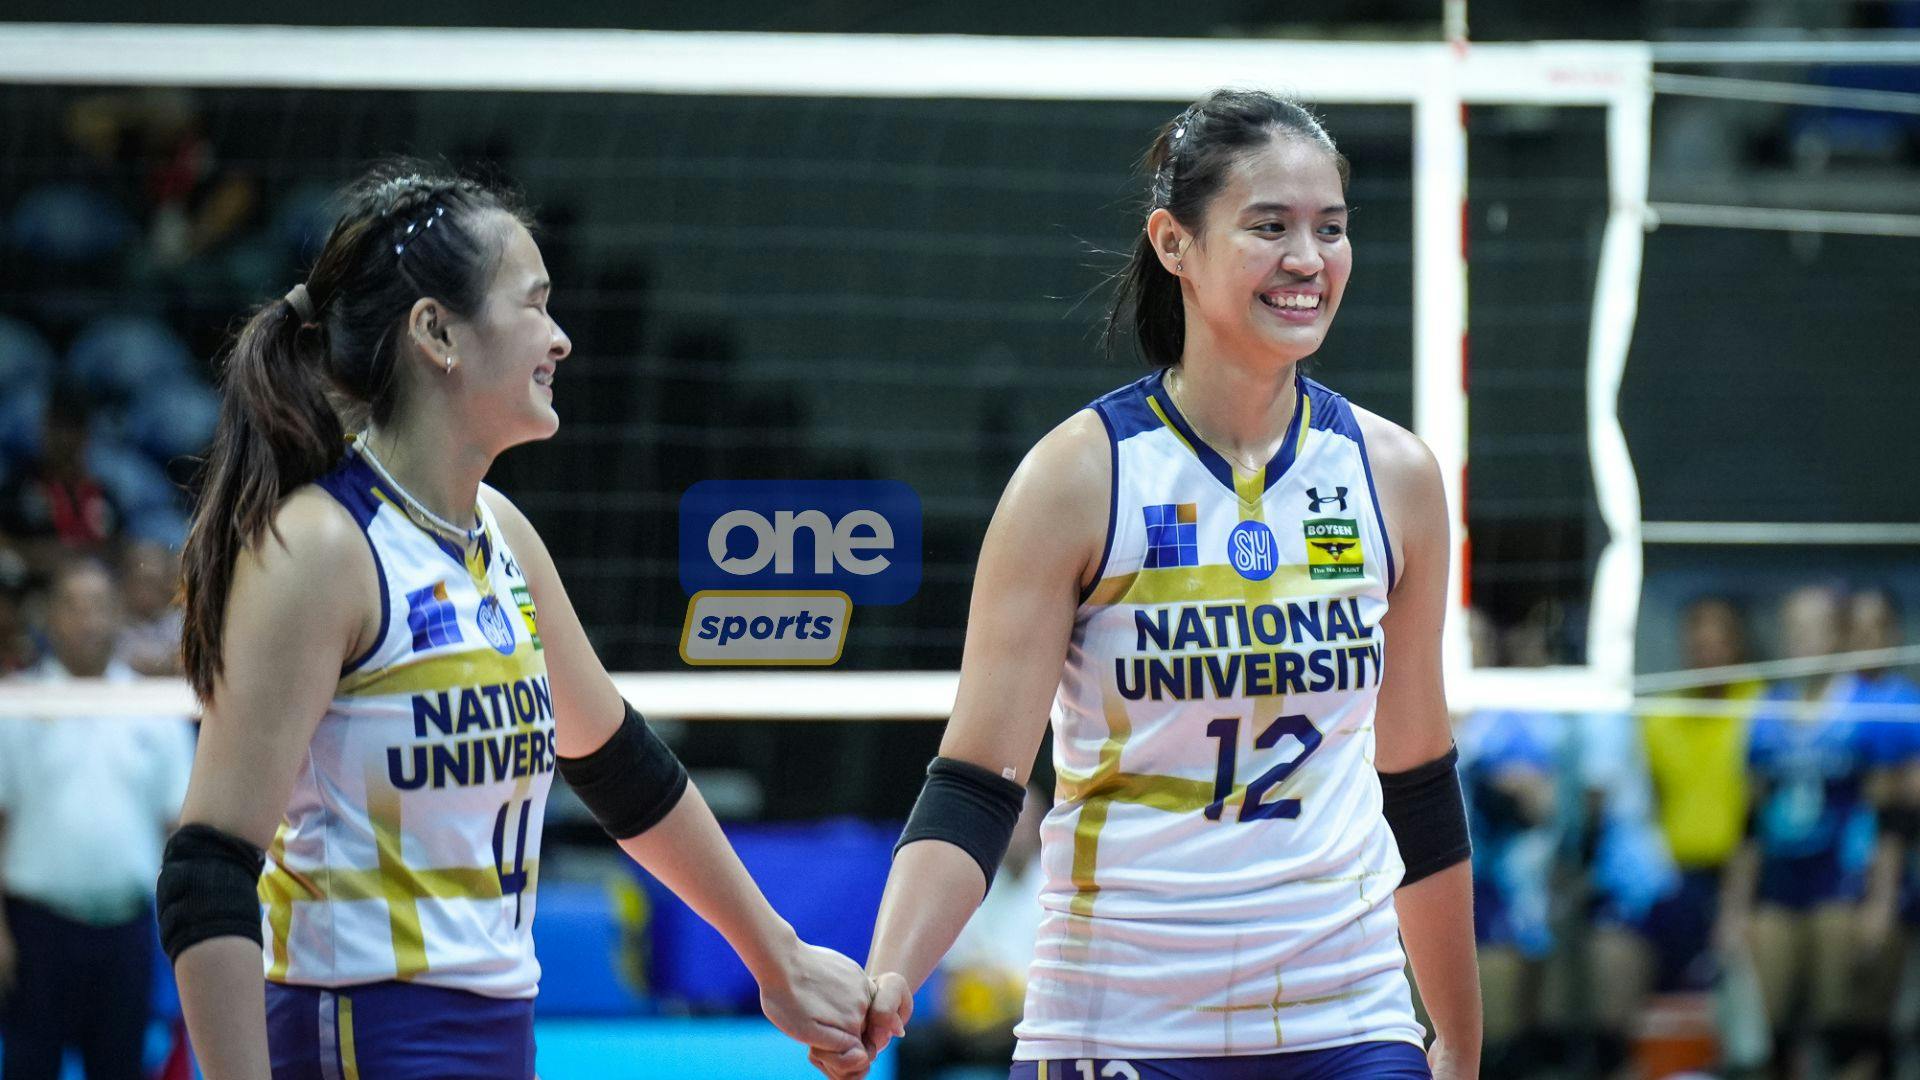 UAAP: National University gains steam, Lady Bulldogs cruise to straight-sets win over Adamson